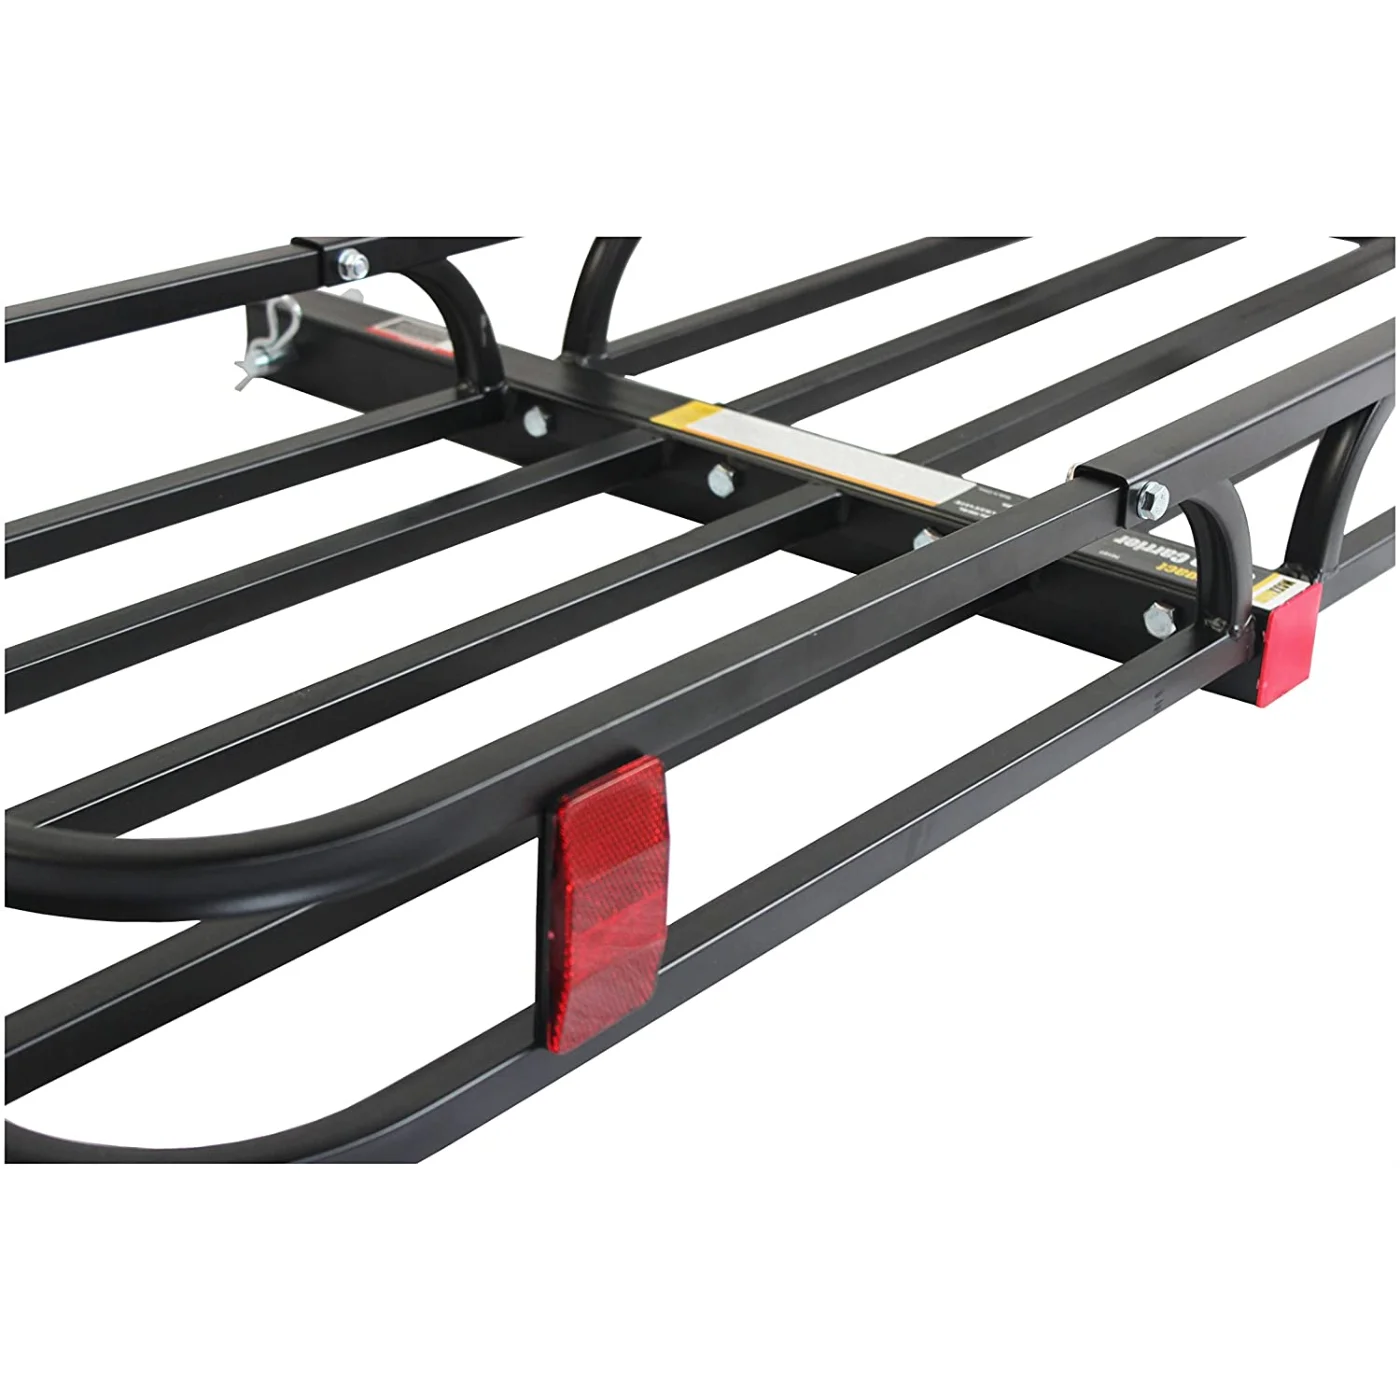 High Quality Hitch Mount Car Rear Cargo Luggage Carrier Rack Universal Roof Rack Car